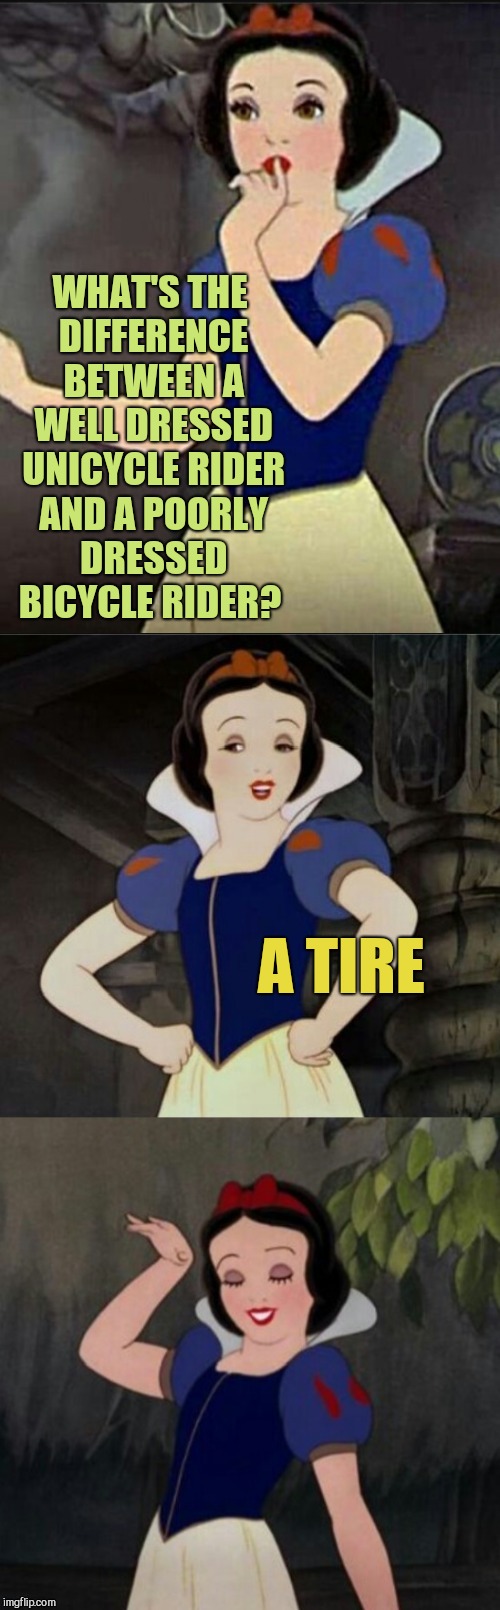 Snow White joke template | WHAT'S THE DIFFERENCE BETWEEN A WELL DRESSED UNICYCLE RIDER AND A POORLY DRESSED BICYCLE RIDER? A TIRE | image tagged in snow white joke template,jbmemegeek,snow white,bad puns | made w/ Imgflip meme maker